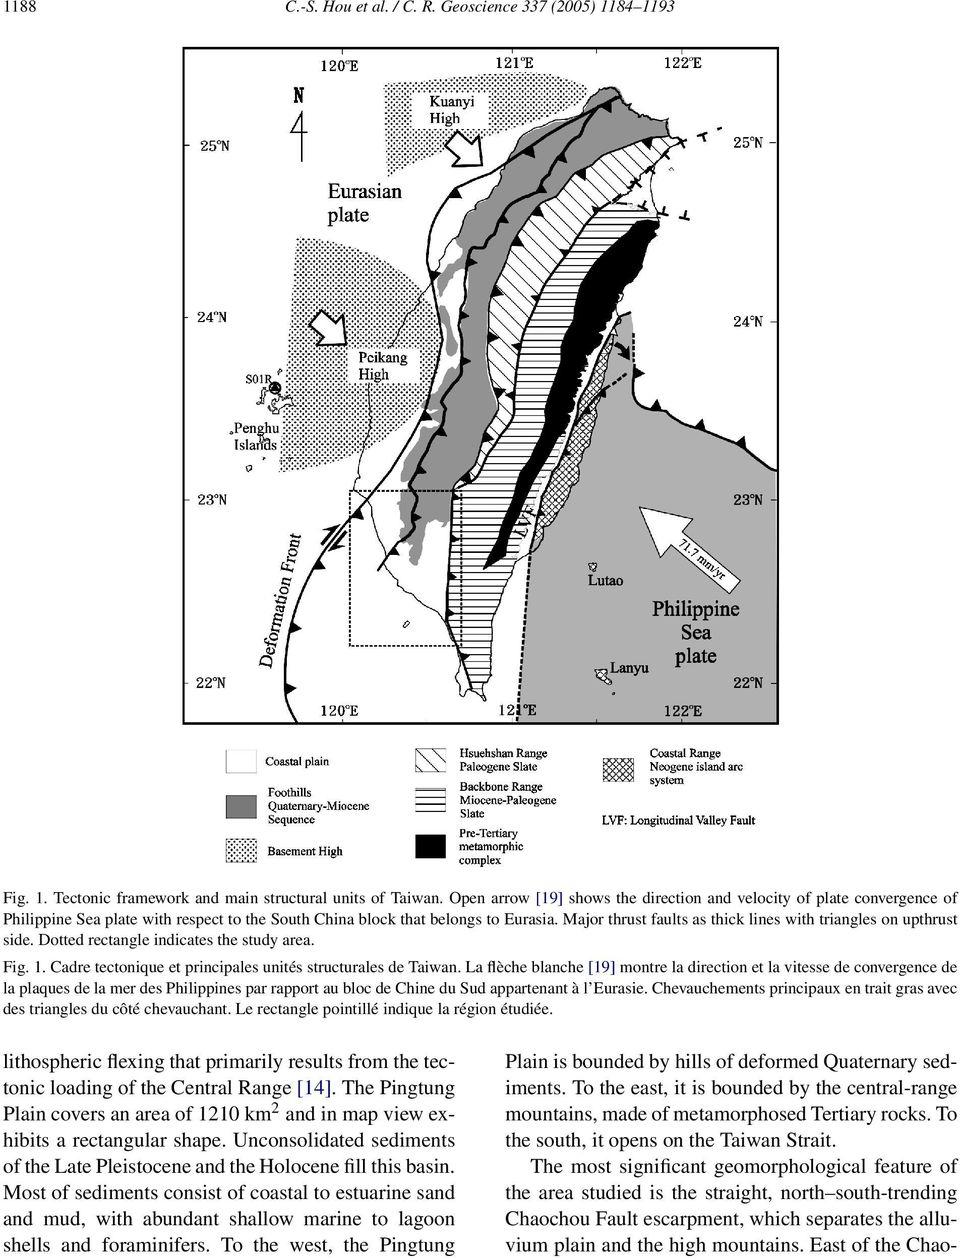 Major thrust faults as thick lines with triangles on upthrust side. Dotted rectangle indicates the study area. Fig. 1. Cadre tectonique et principales unités structurales de Taiwan.